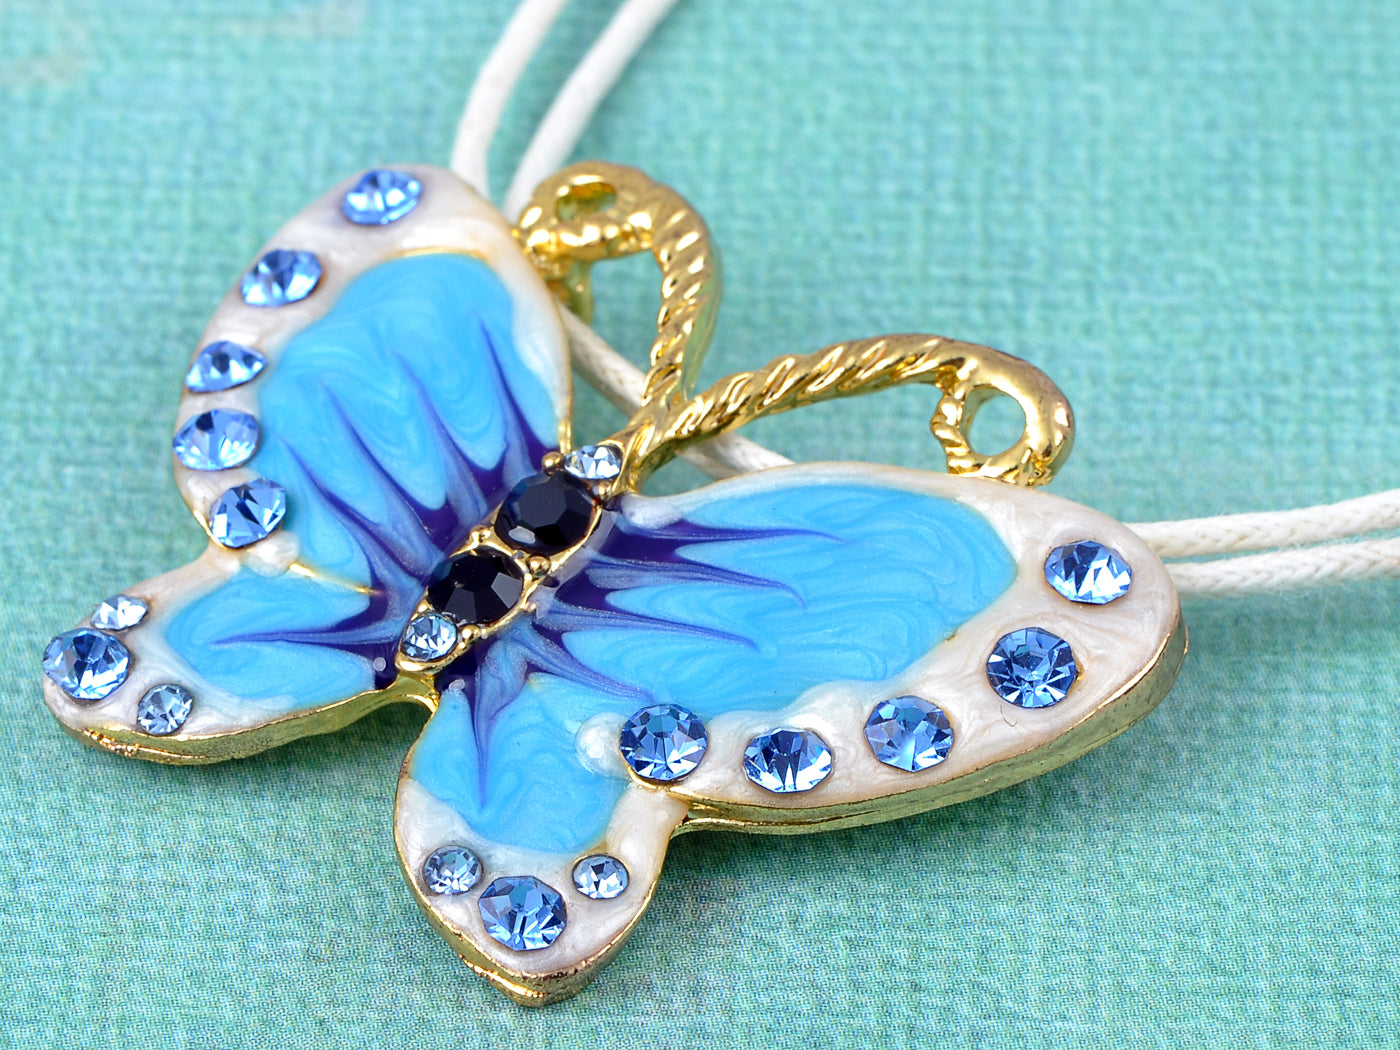 Blue Pearlescent White Butterfly Multi Strand Rope Necklace